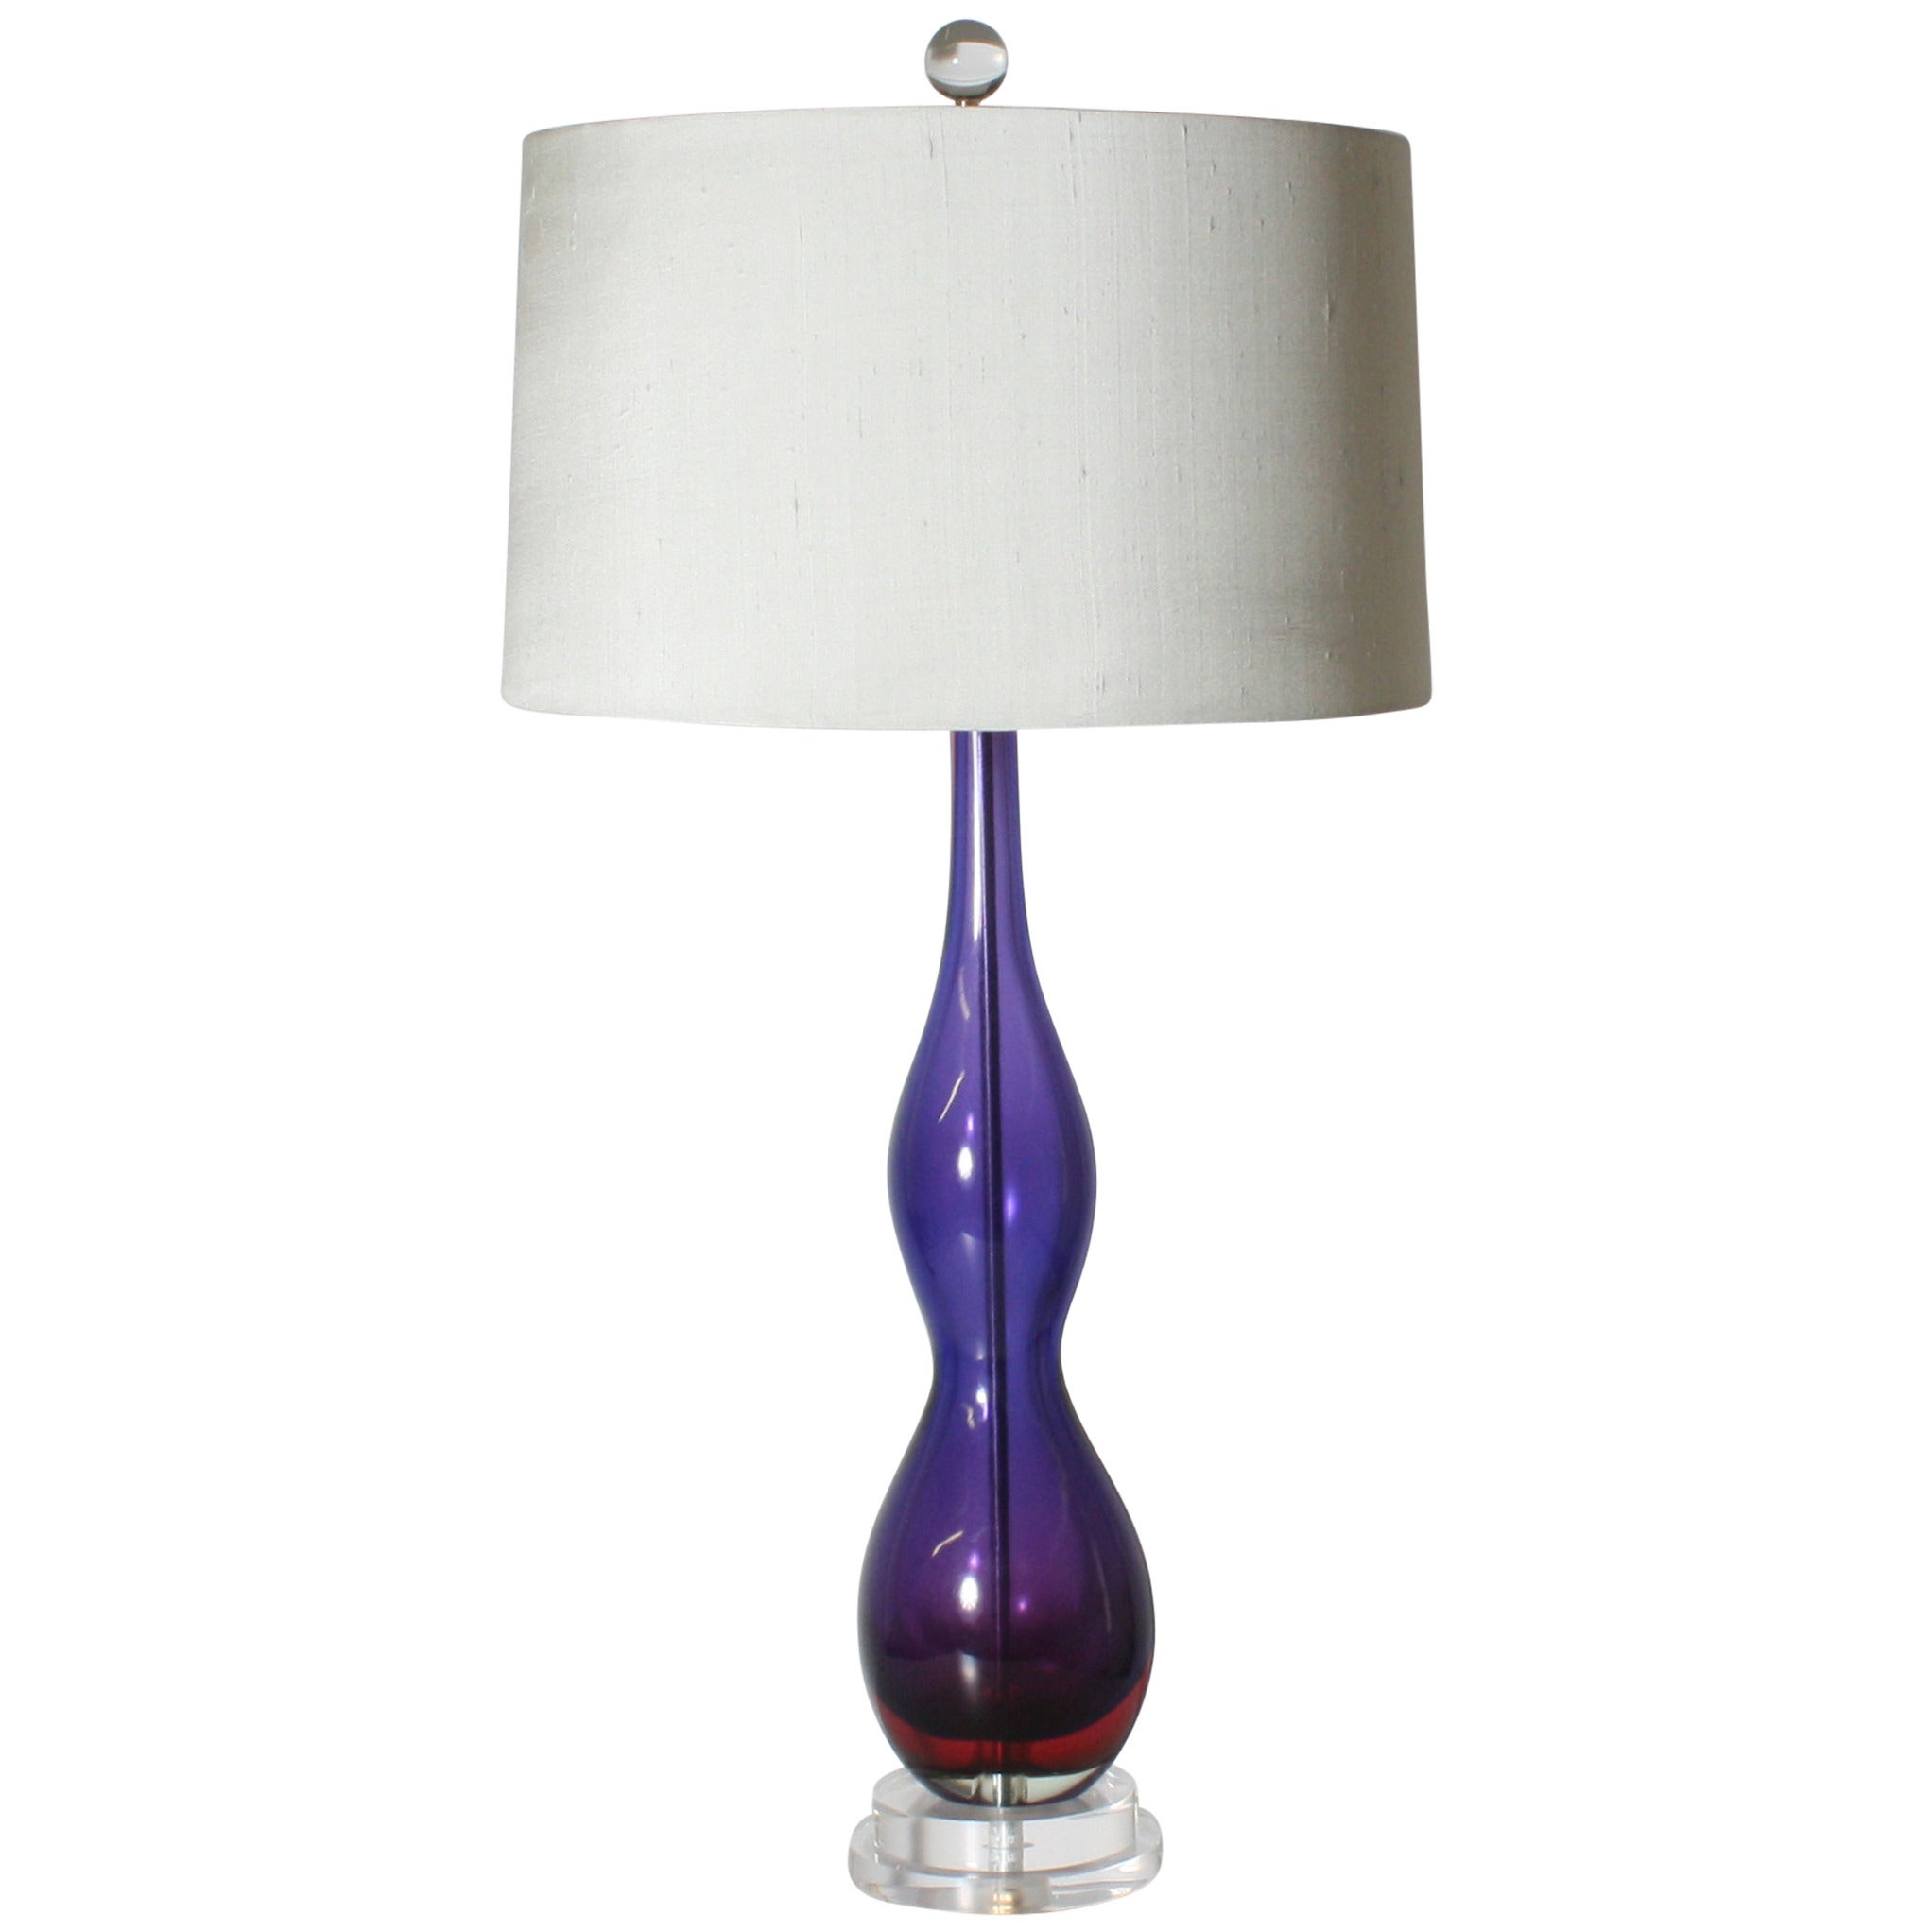 Sommerso Purple Lamp with Red Interior in the style of Poli, circa 1960